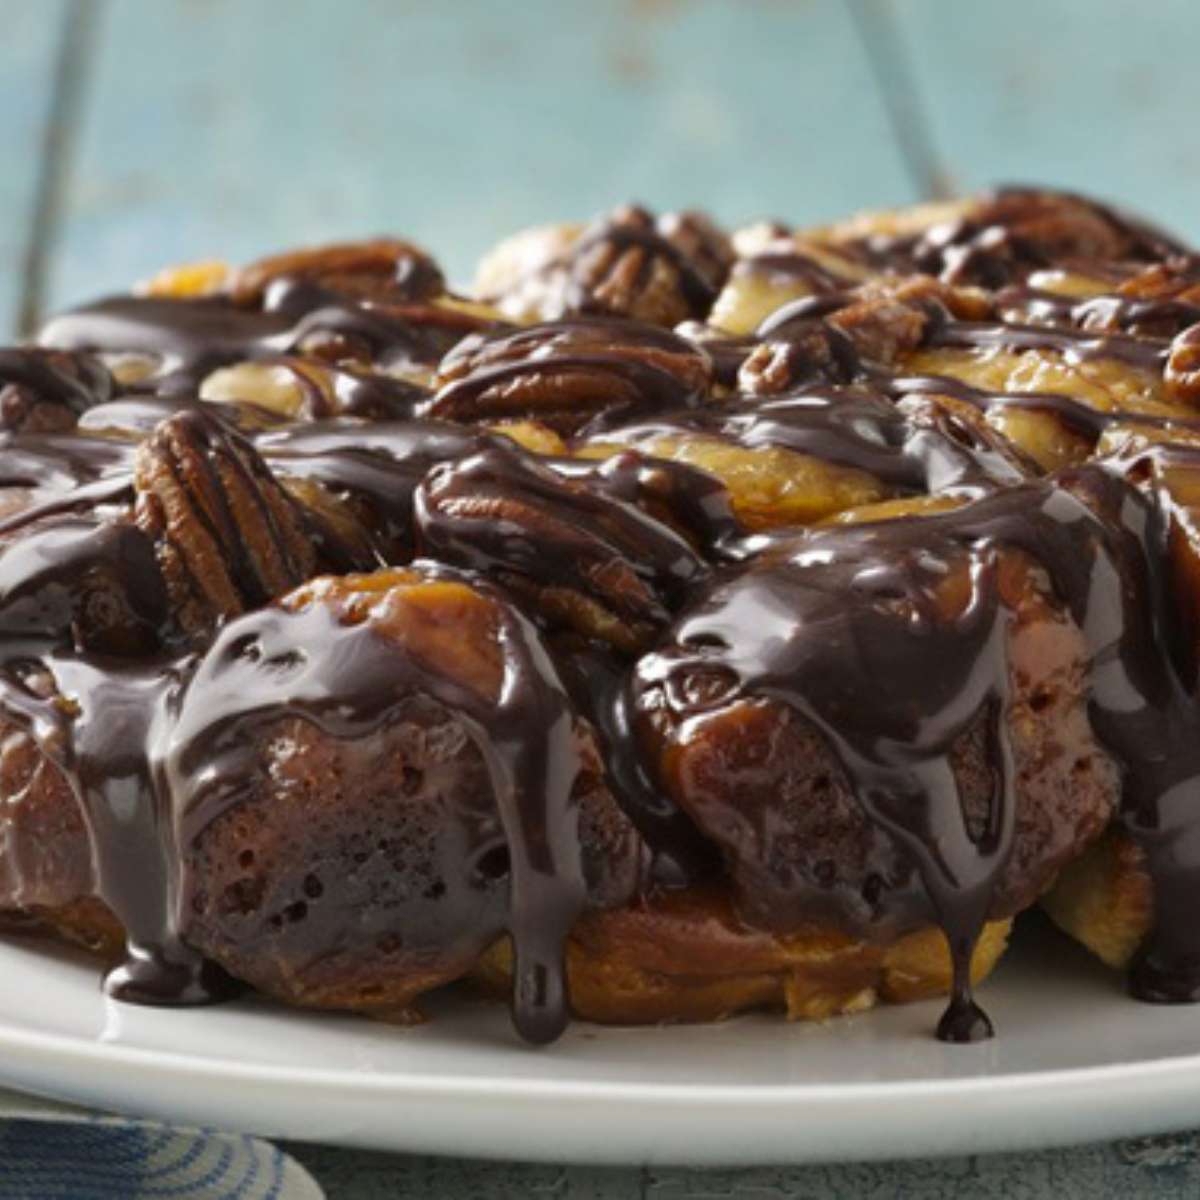 Slow cooker turtle monkey bread with pecans and a chocolate drizzle on a plate.